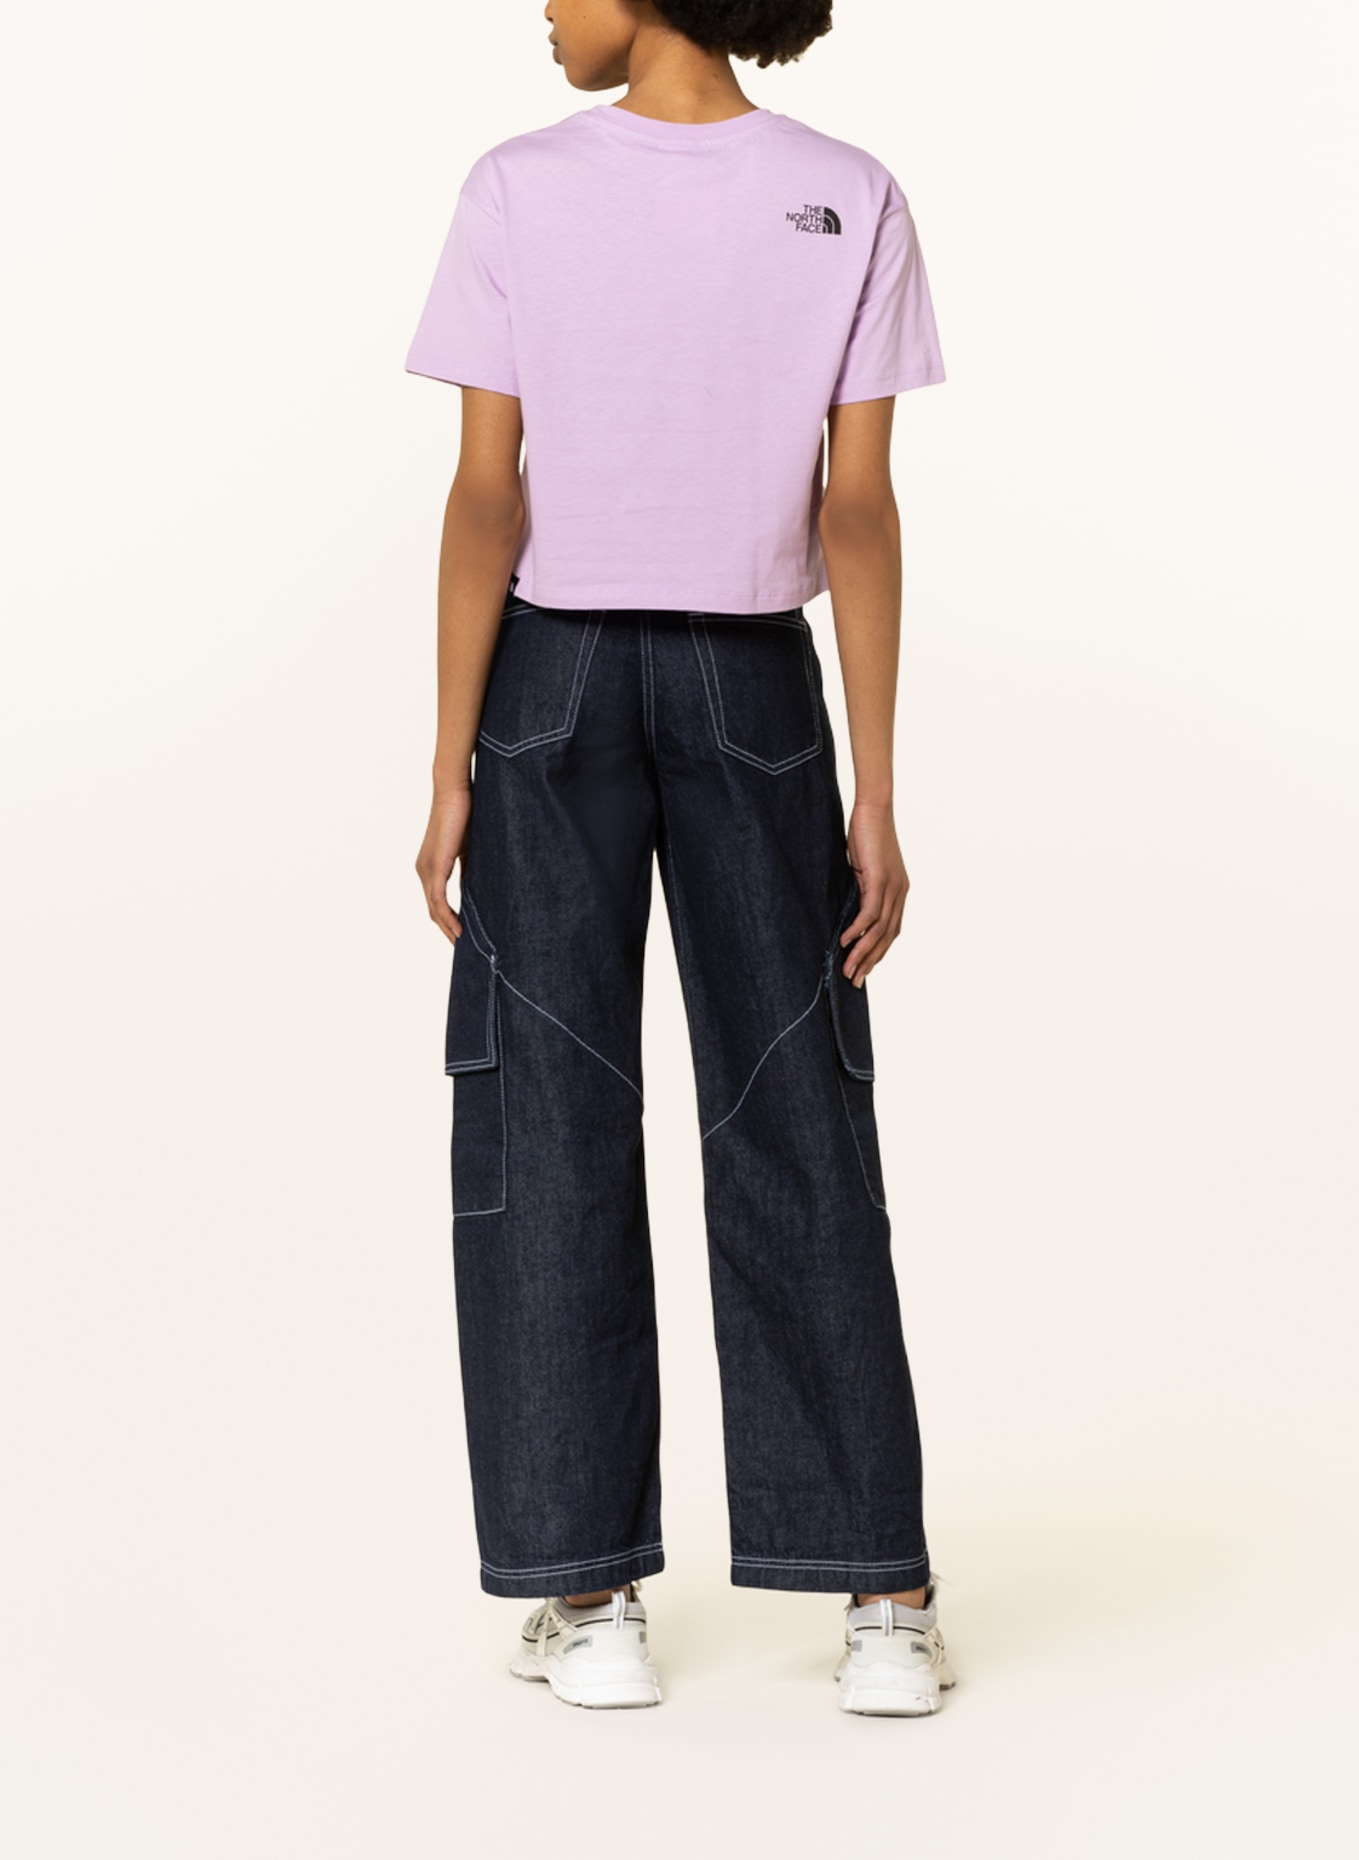 THE NORTH FACE Cropped-Shirt FINE TEE, Farbe: HELLLILA (Bild 3)